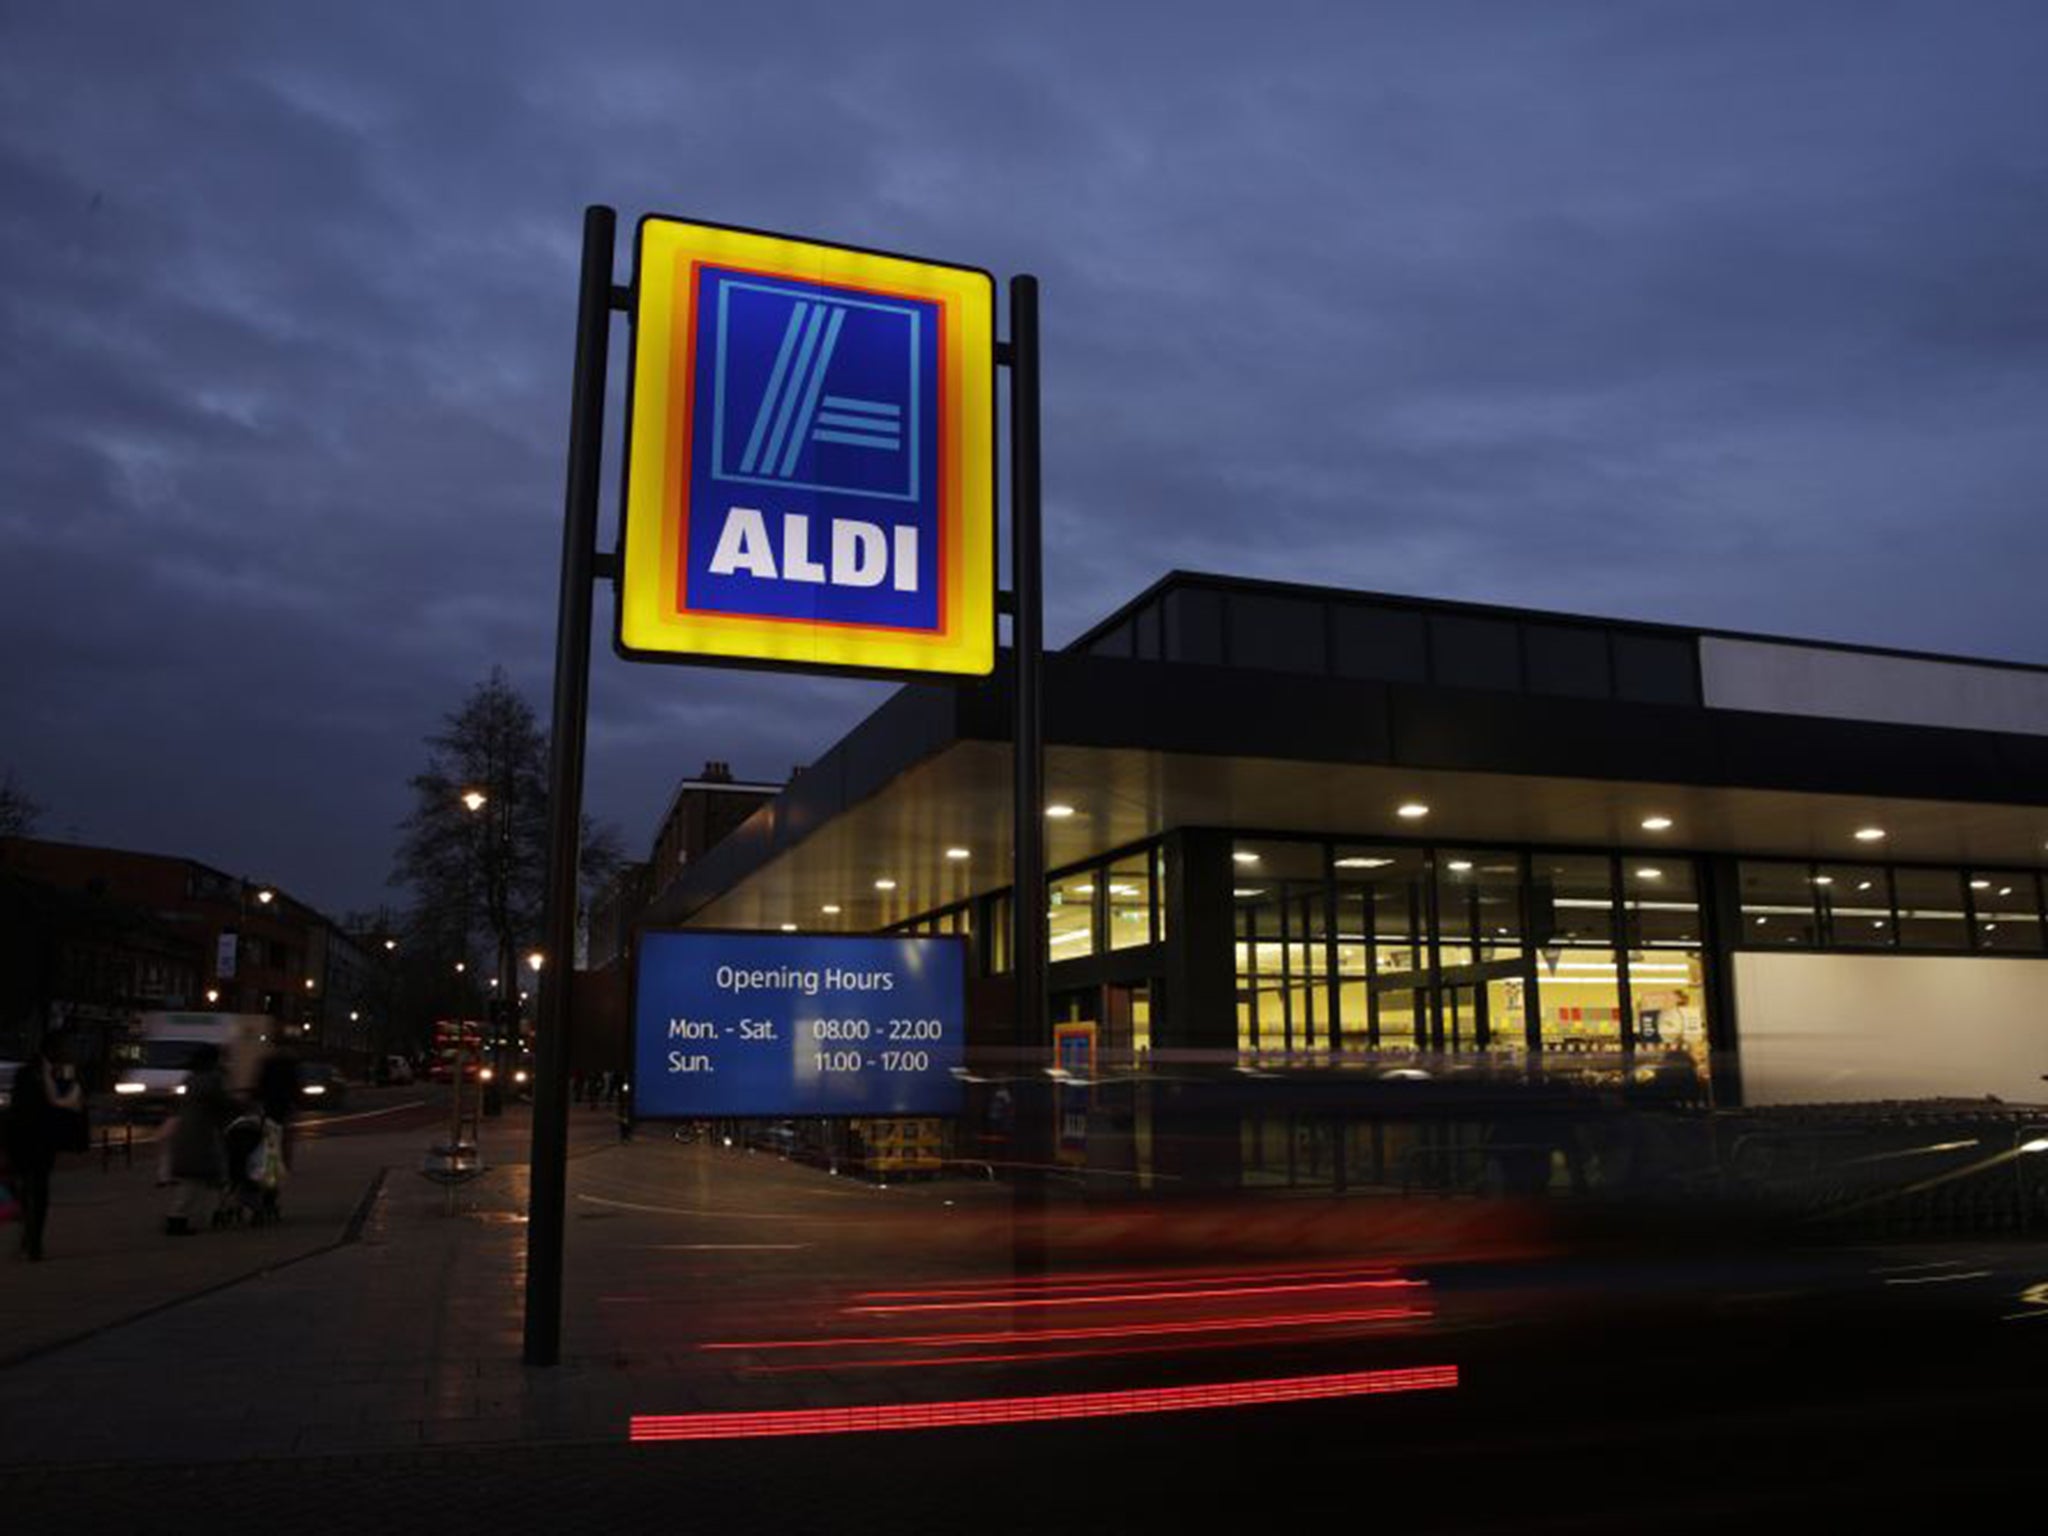 Aldi comes first on the global index for the third year running